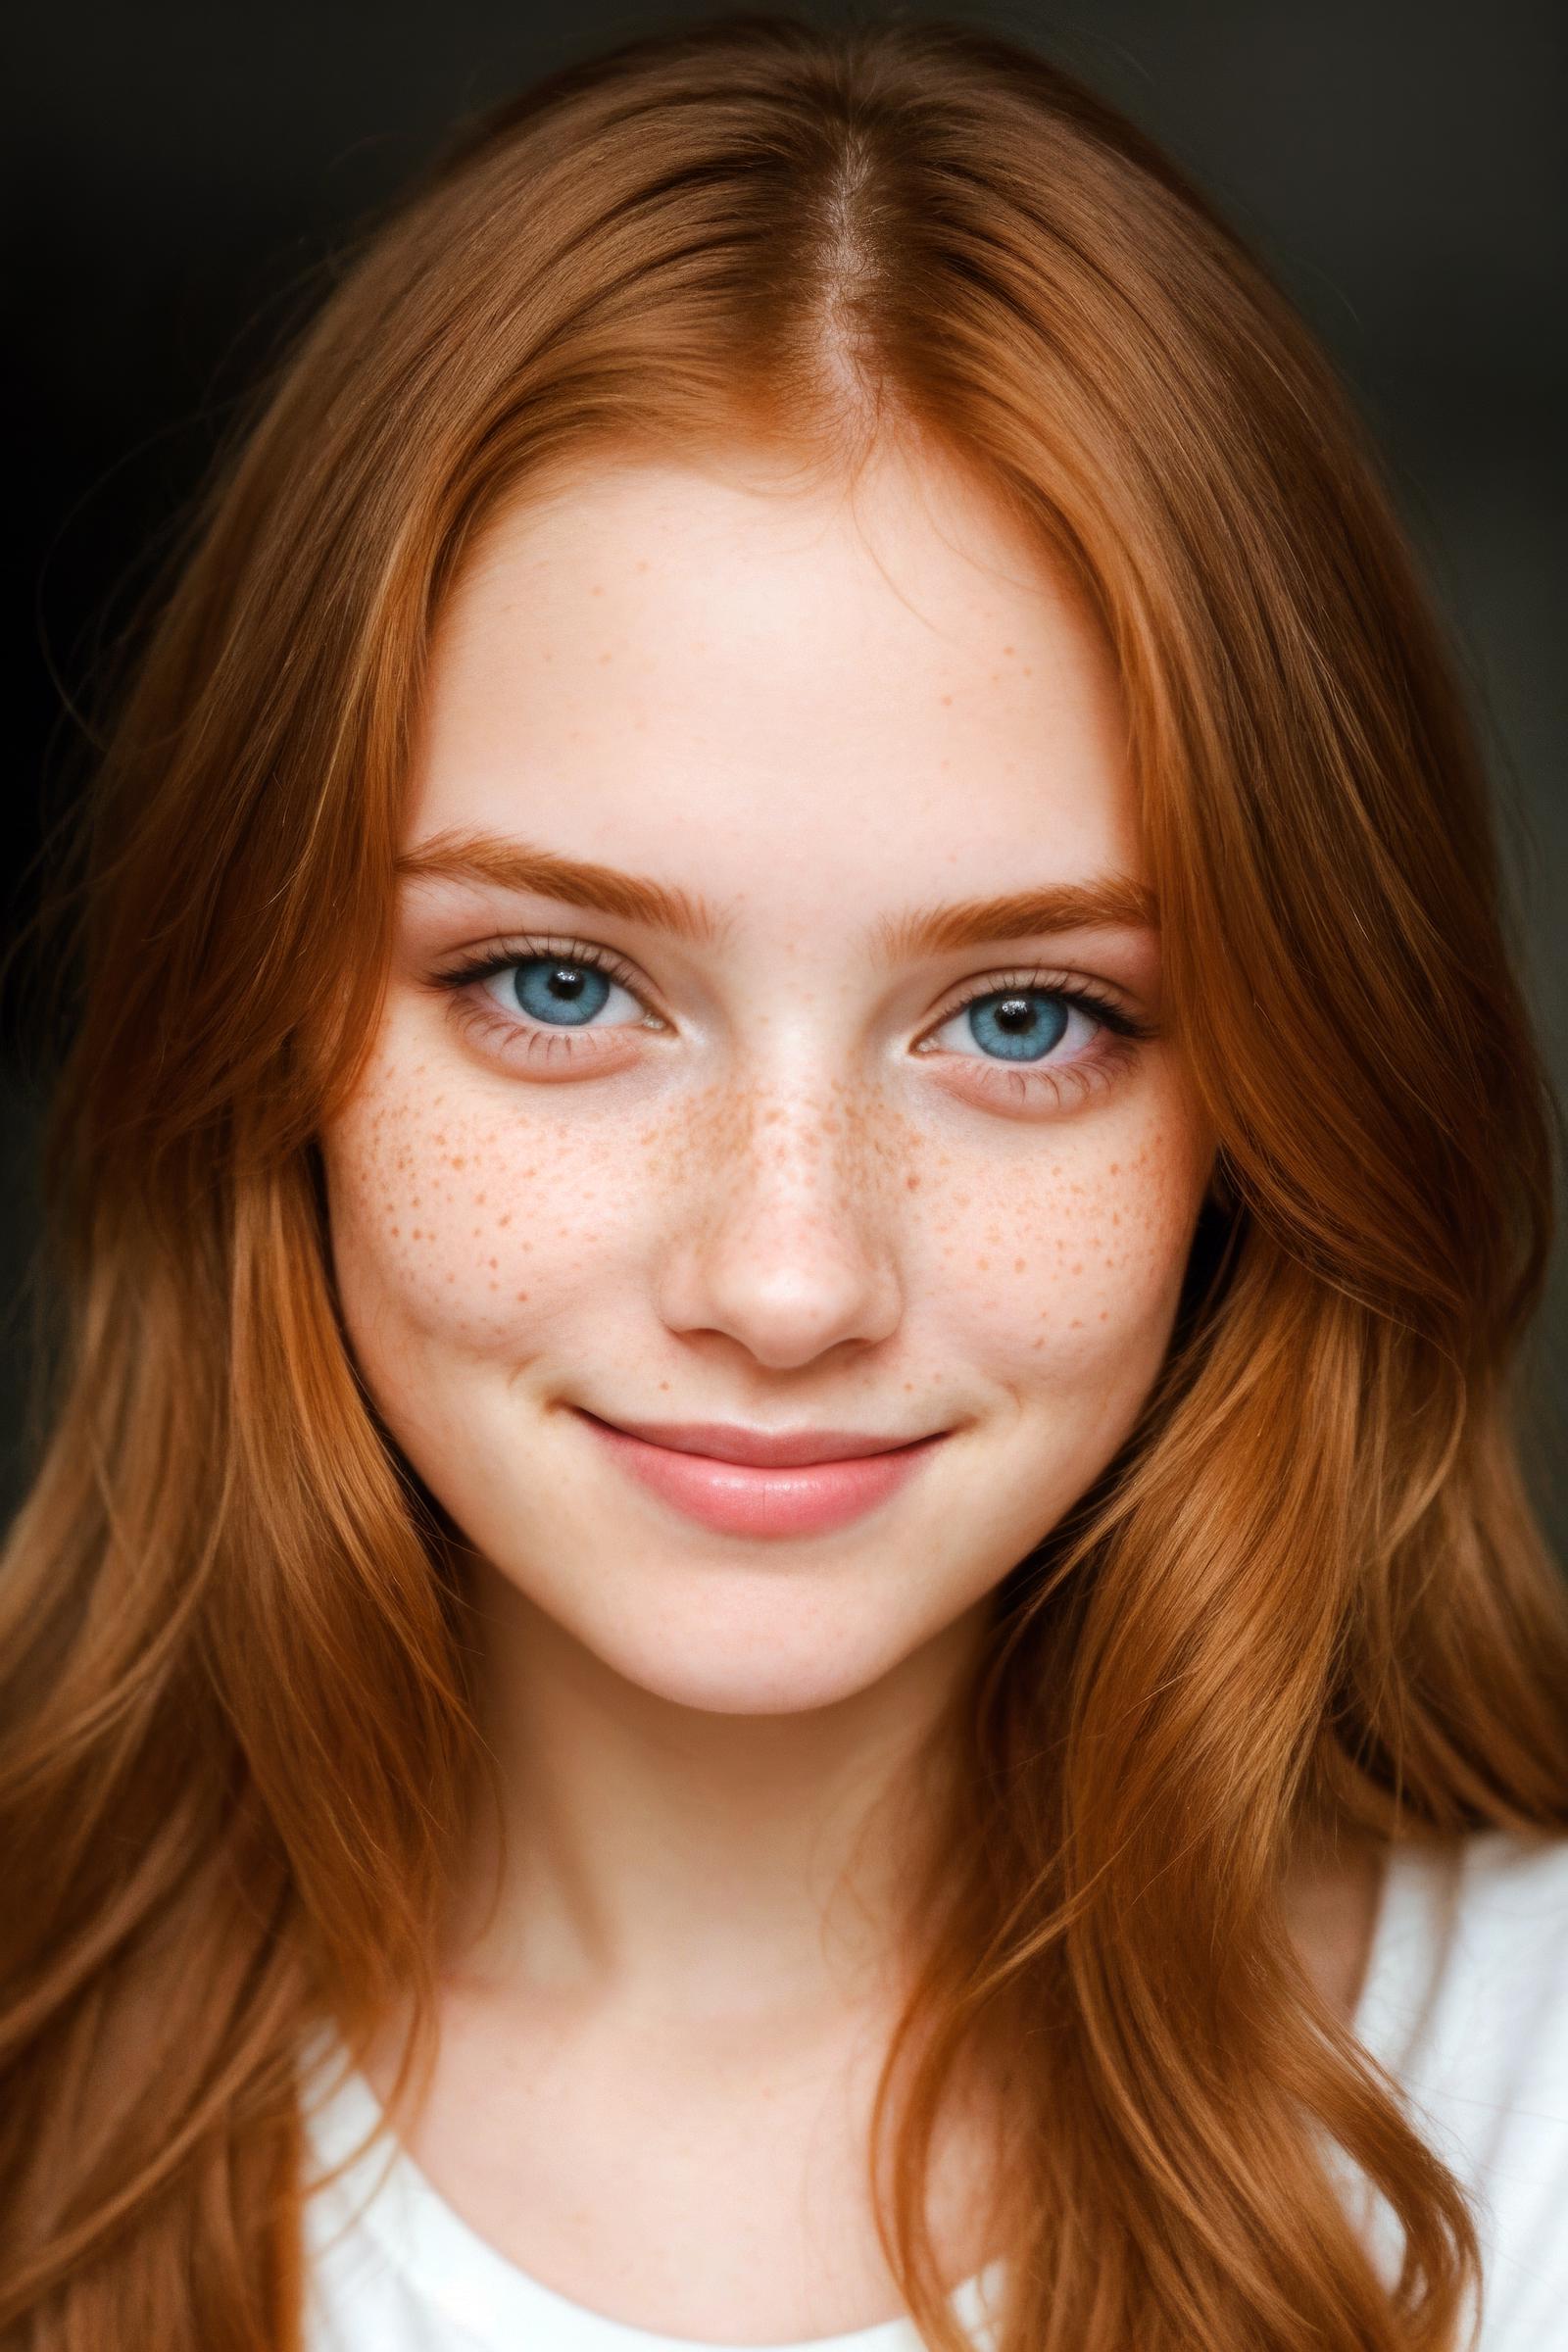 A smiling woman with red hair and freckles.